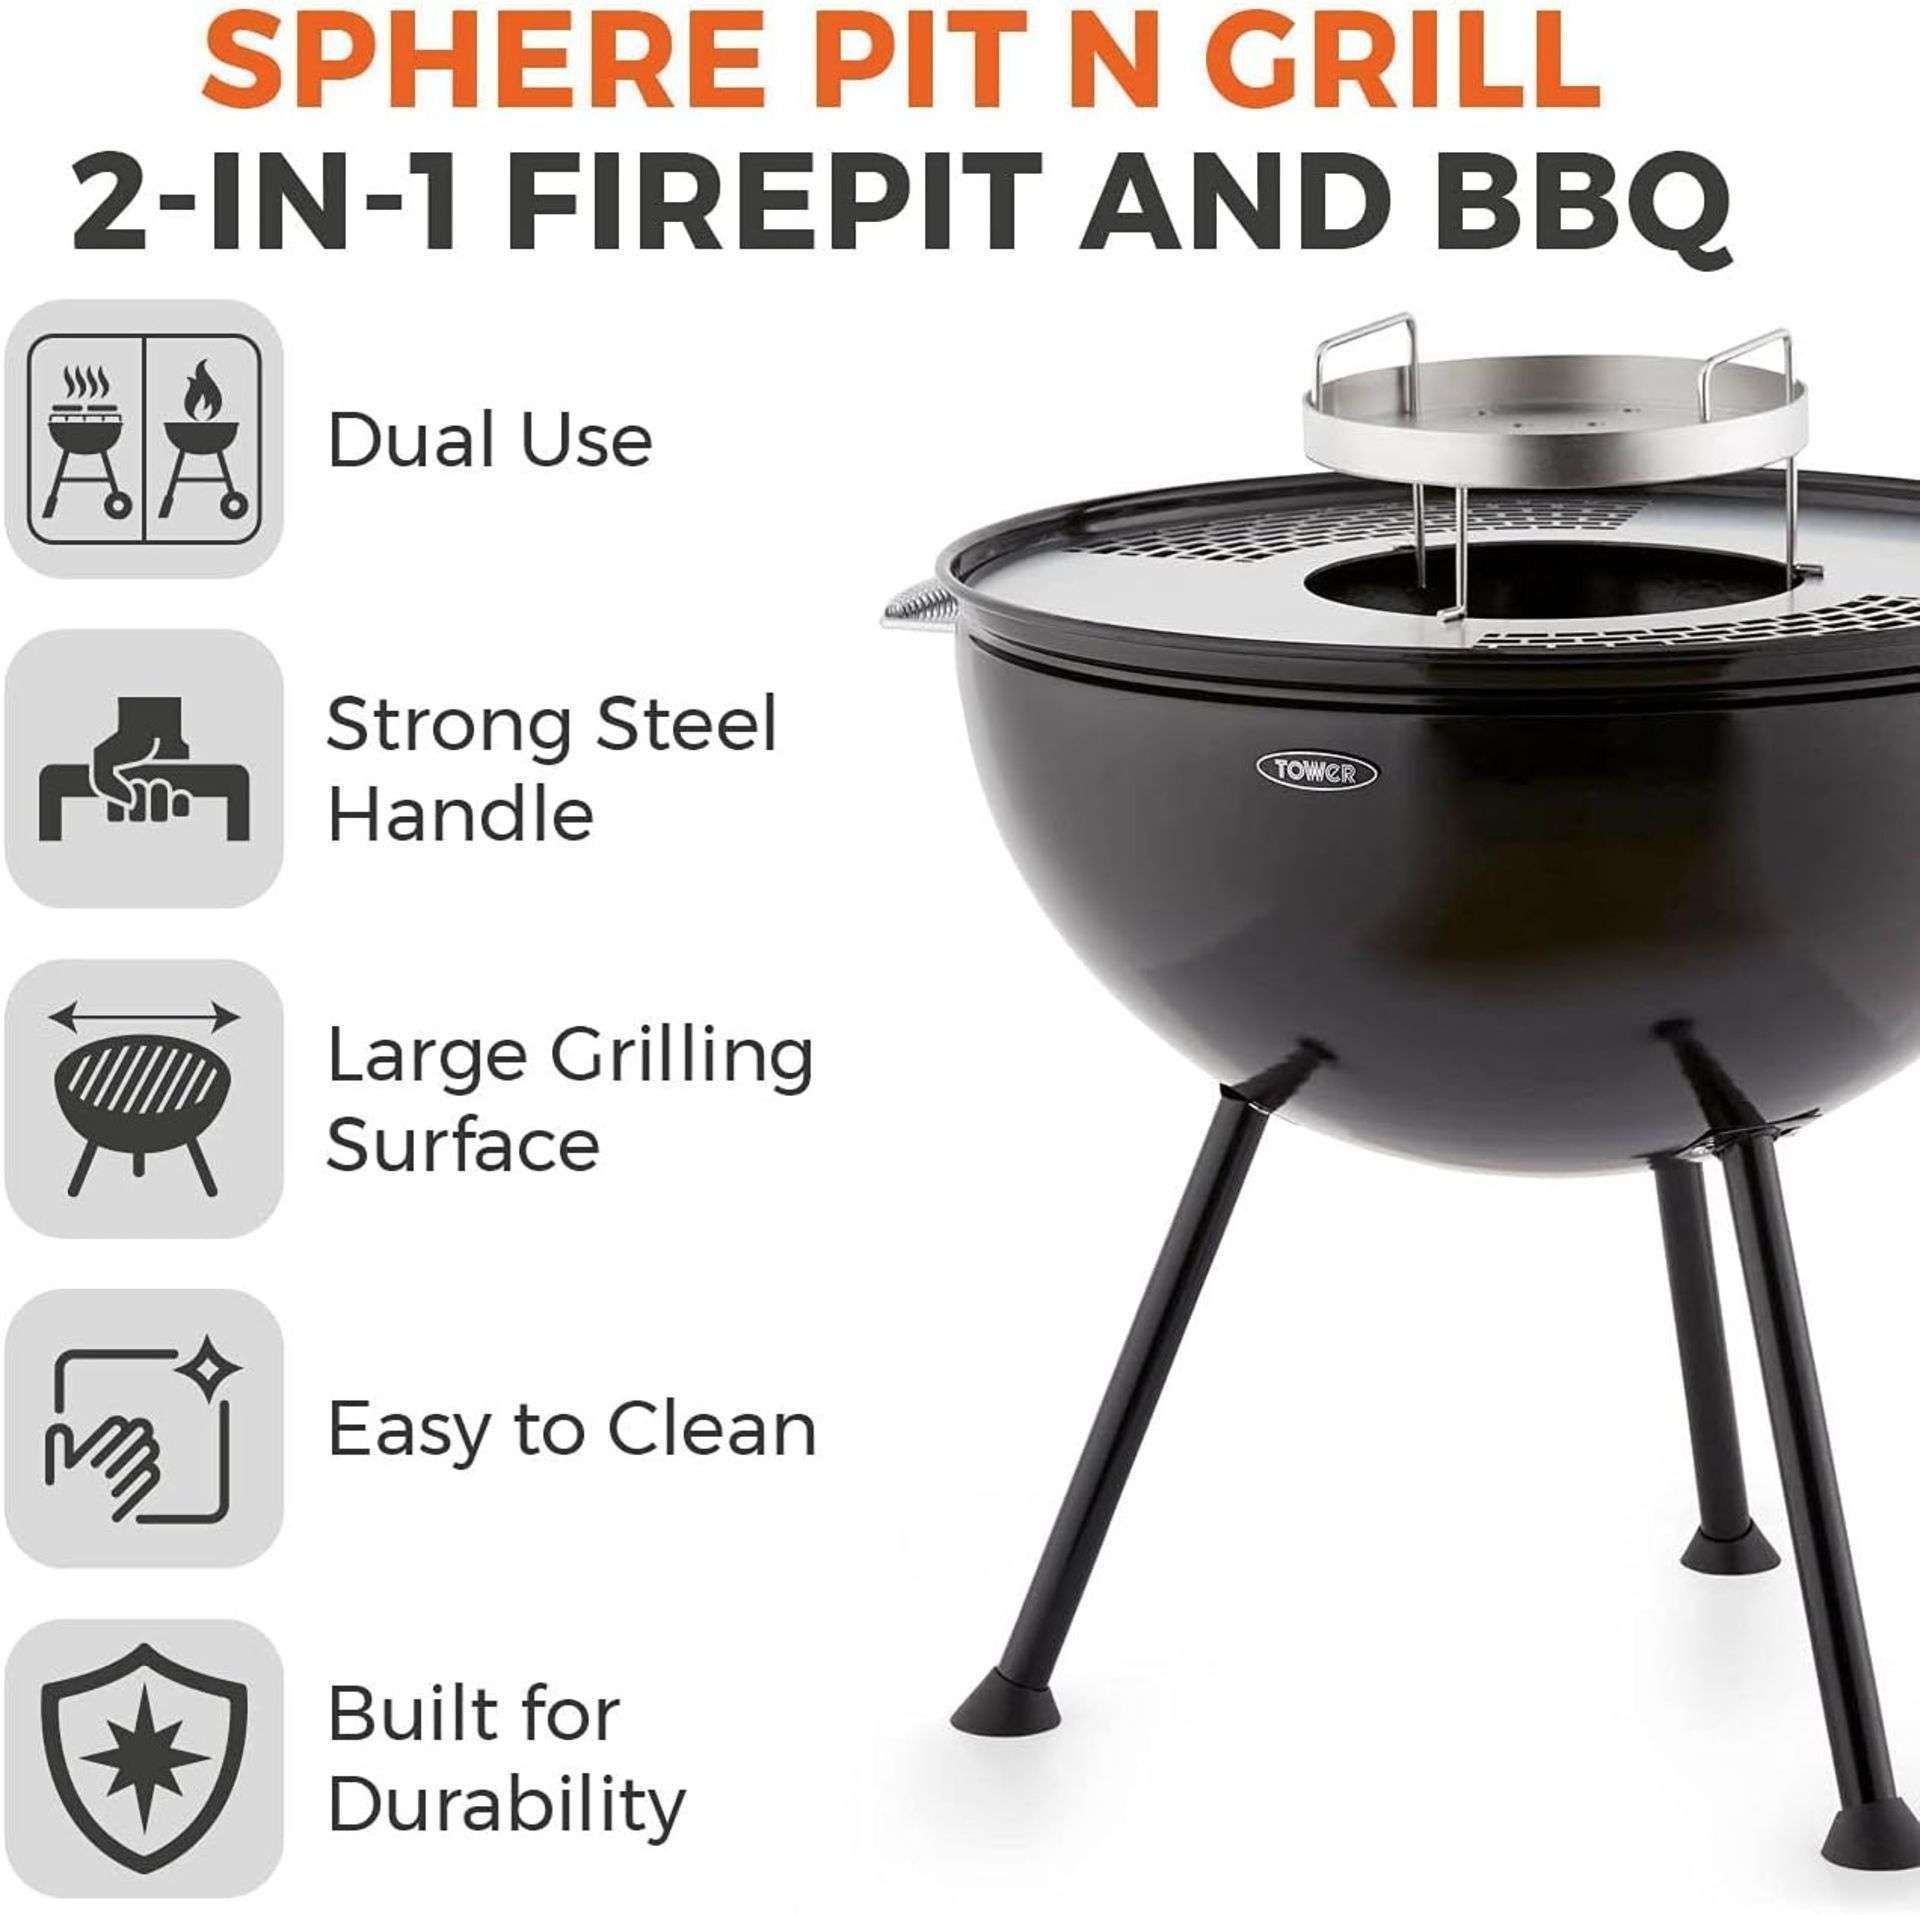 New & Boxed Tower Sphere Fire Pit and BBQ Grill, Black. (VQ577). DUAL USE â€“ This multi- - Bild 2 aus 4